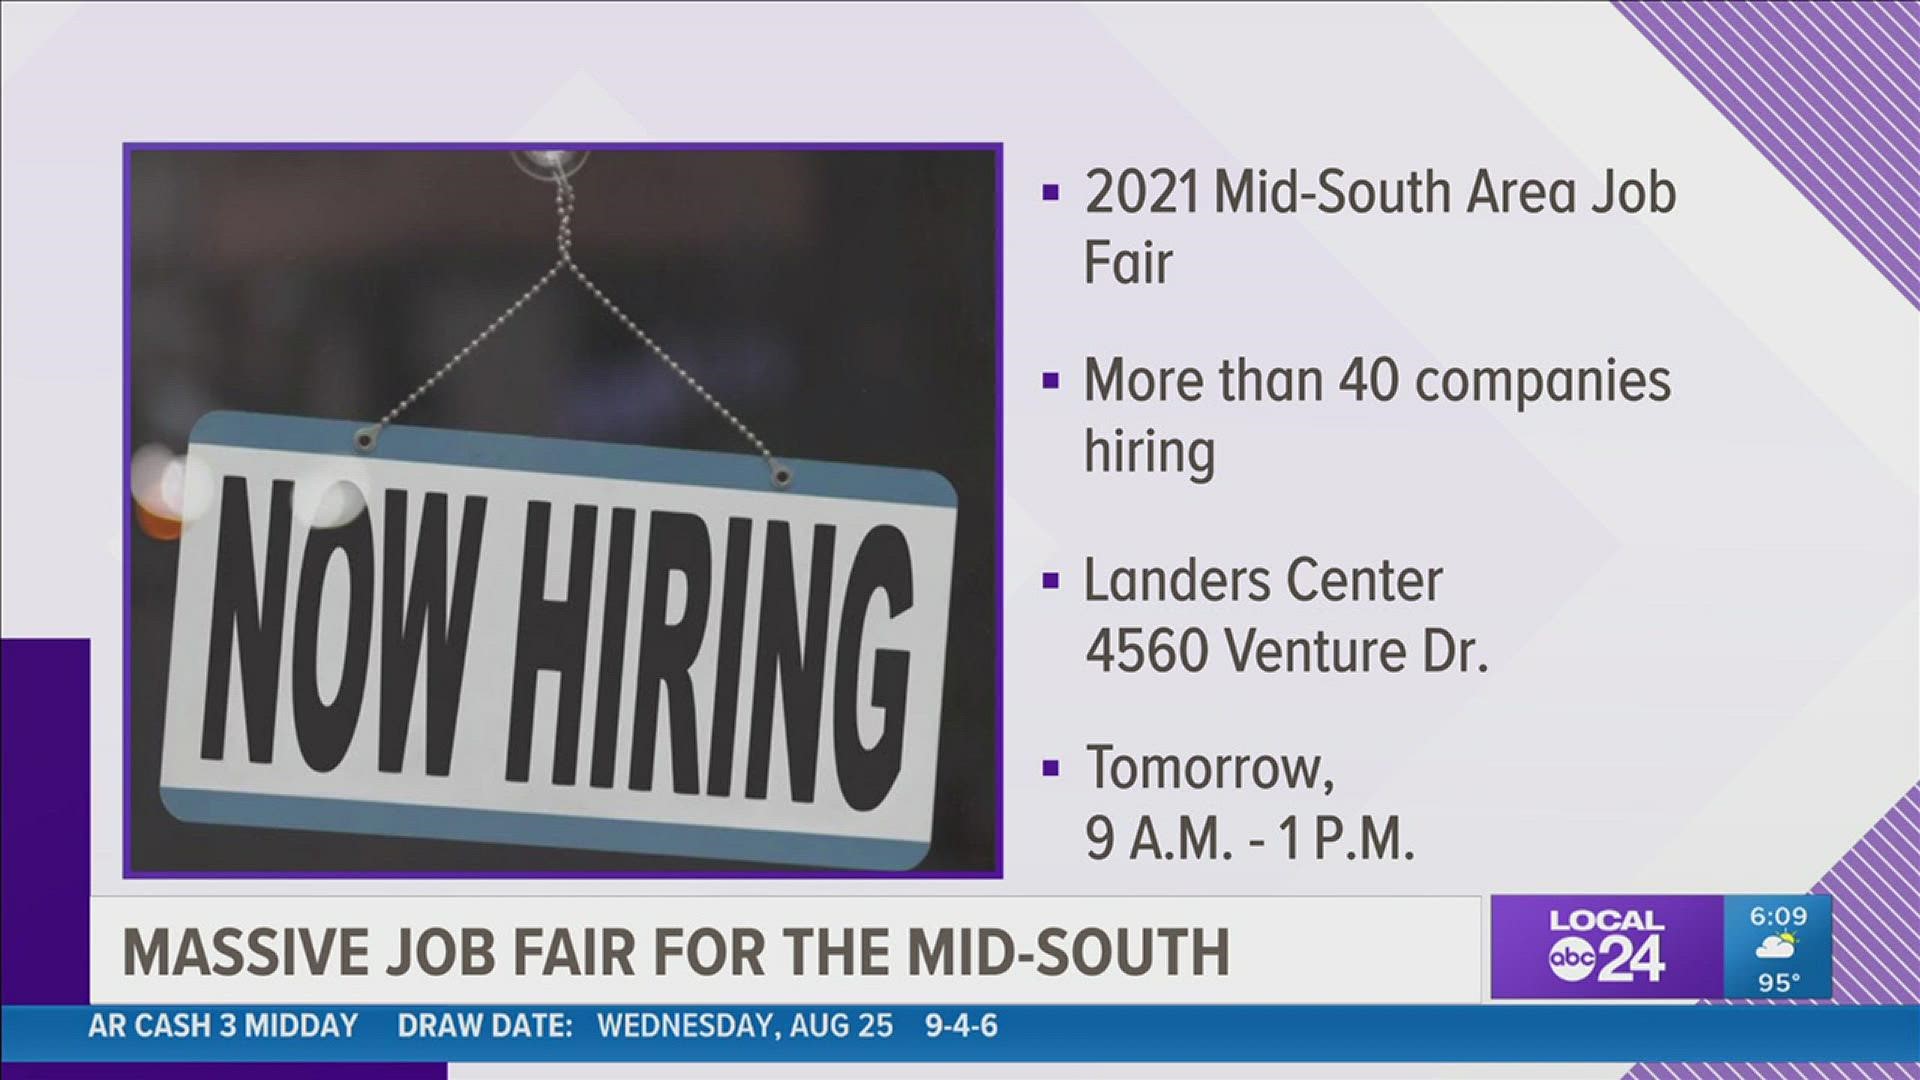 The 2021 Mid-South Area Job Fair has over 40 companies looking to hire people.